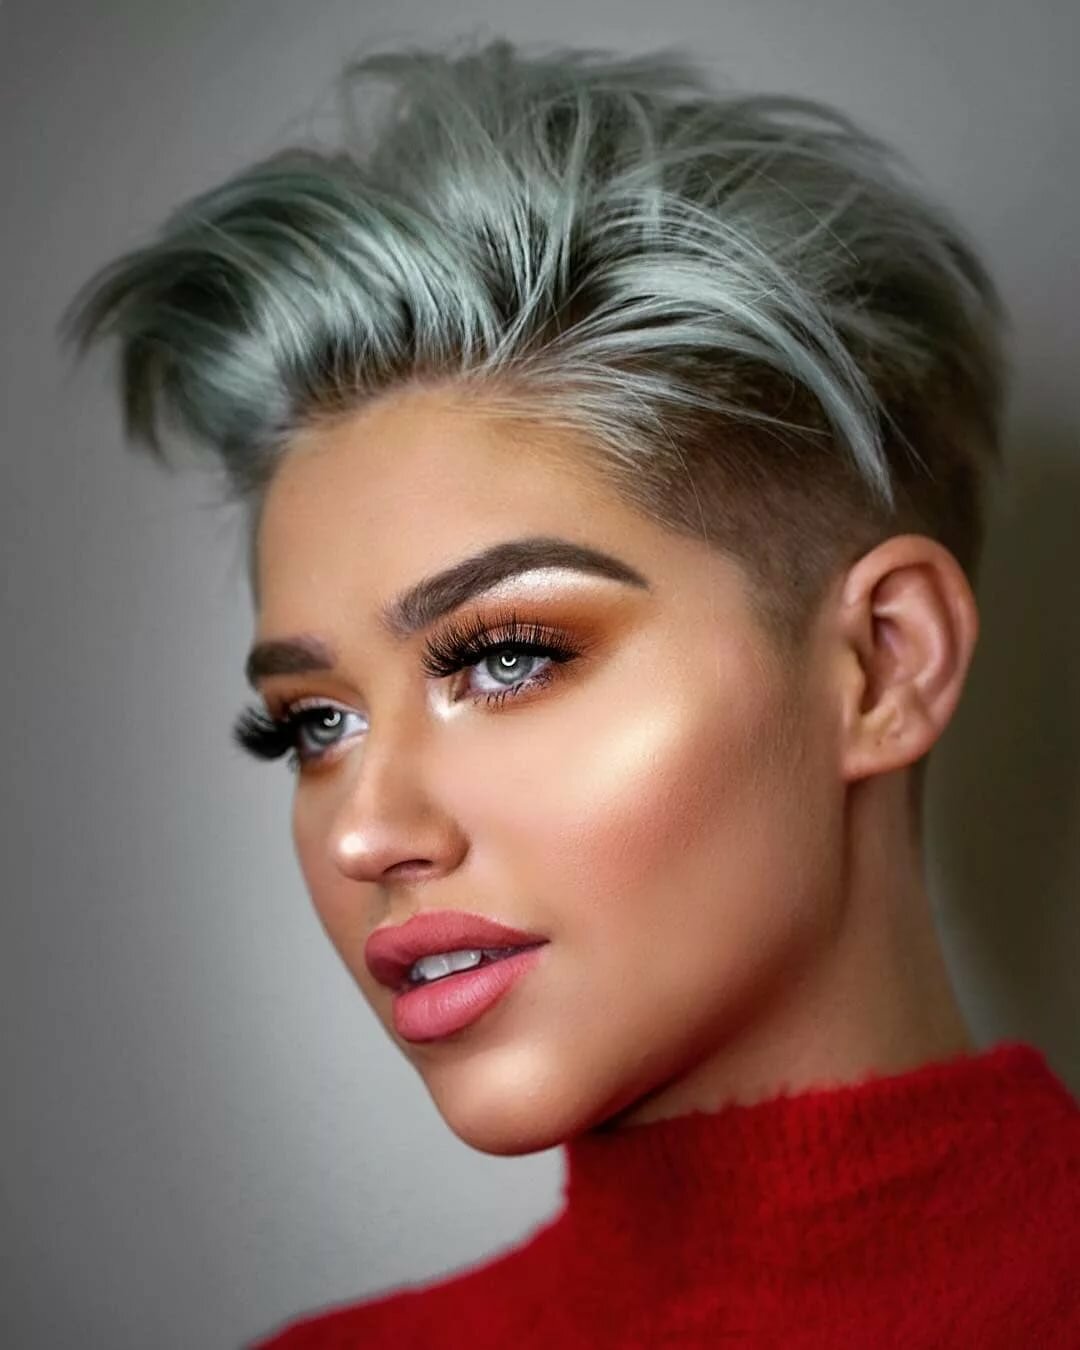 20 Stylish Short Haircuts for Women 2021-2022 - Page 7 of 7